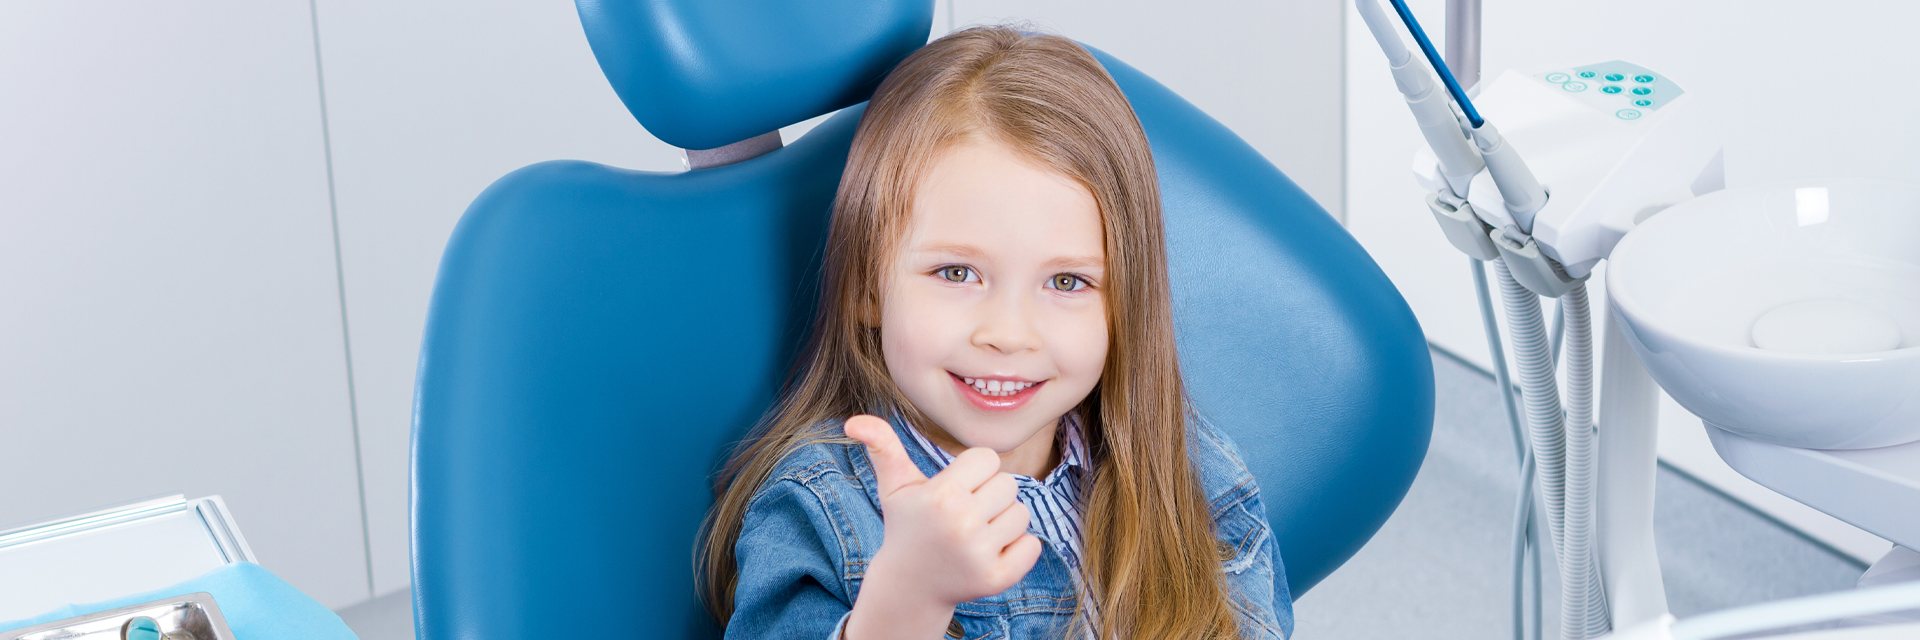 Why Should You Choose a Pediatric Dentist Over Generals Ones?